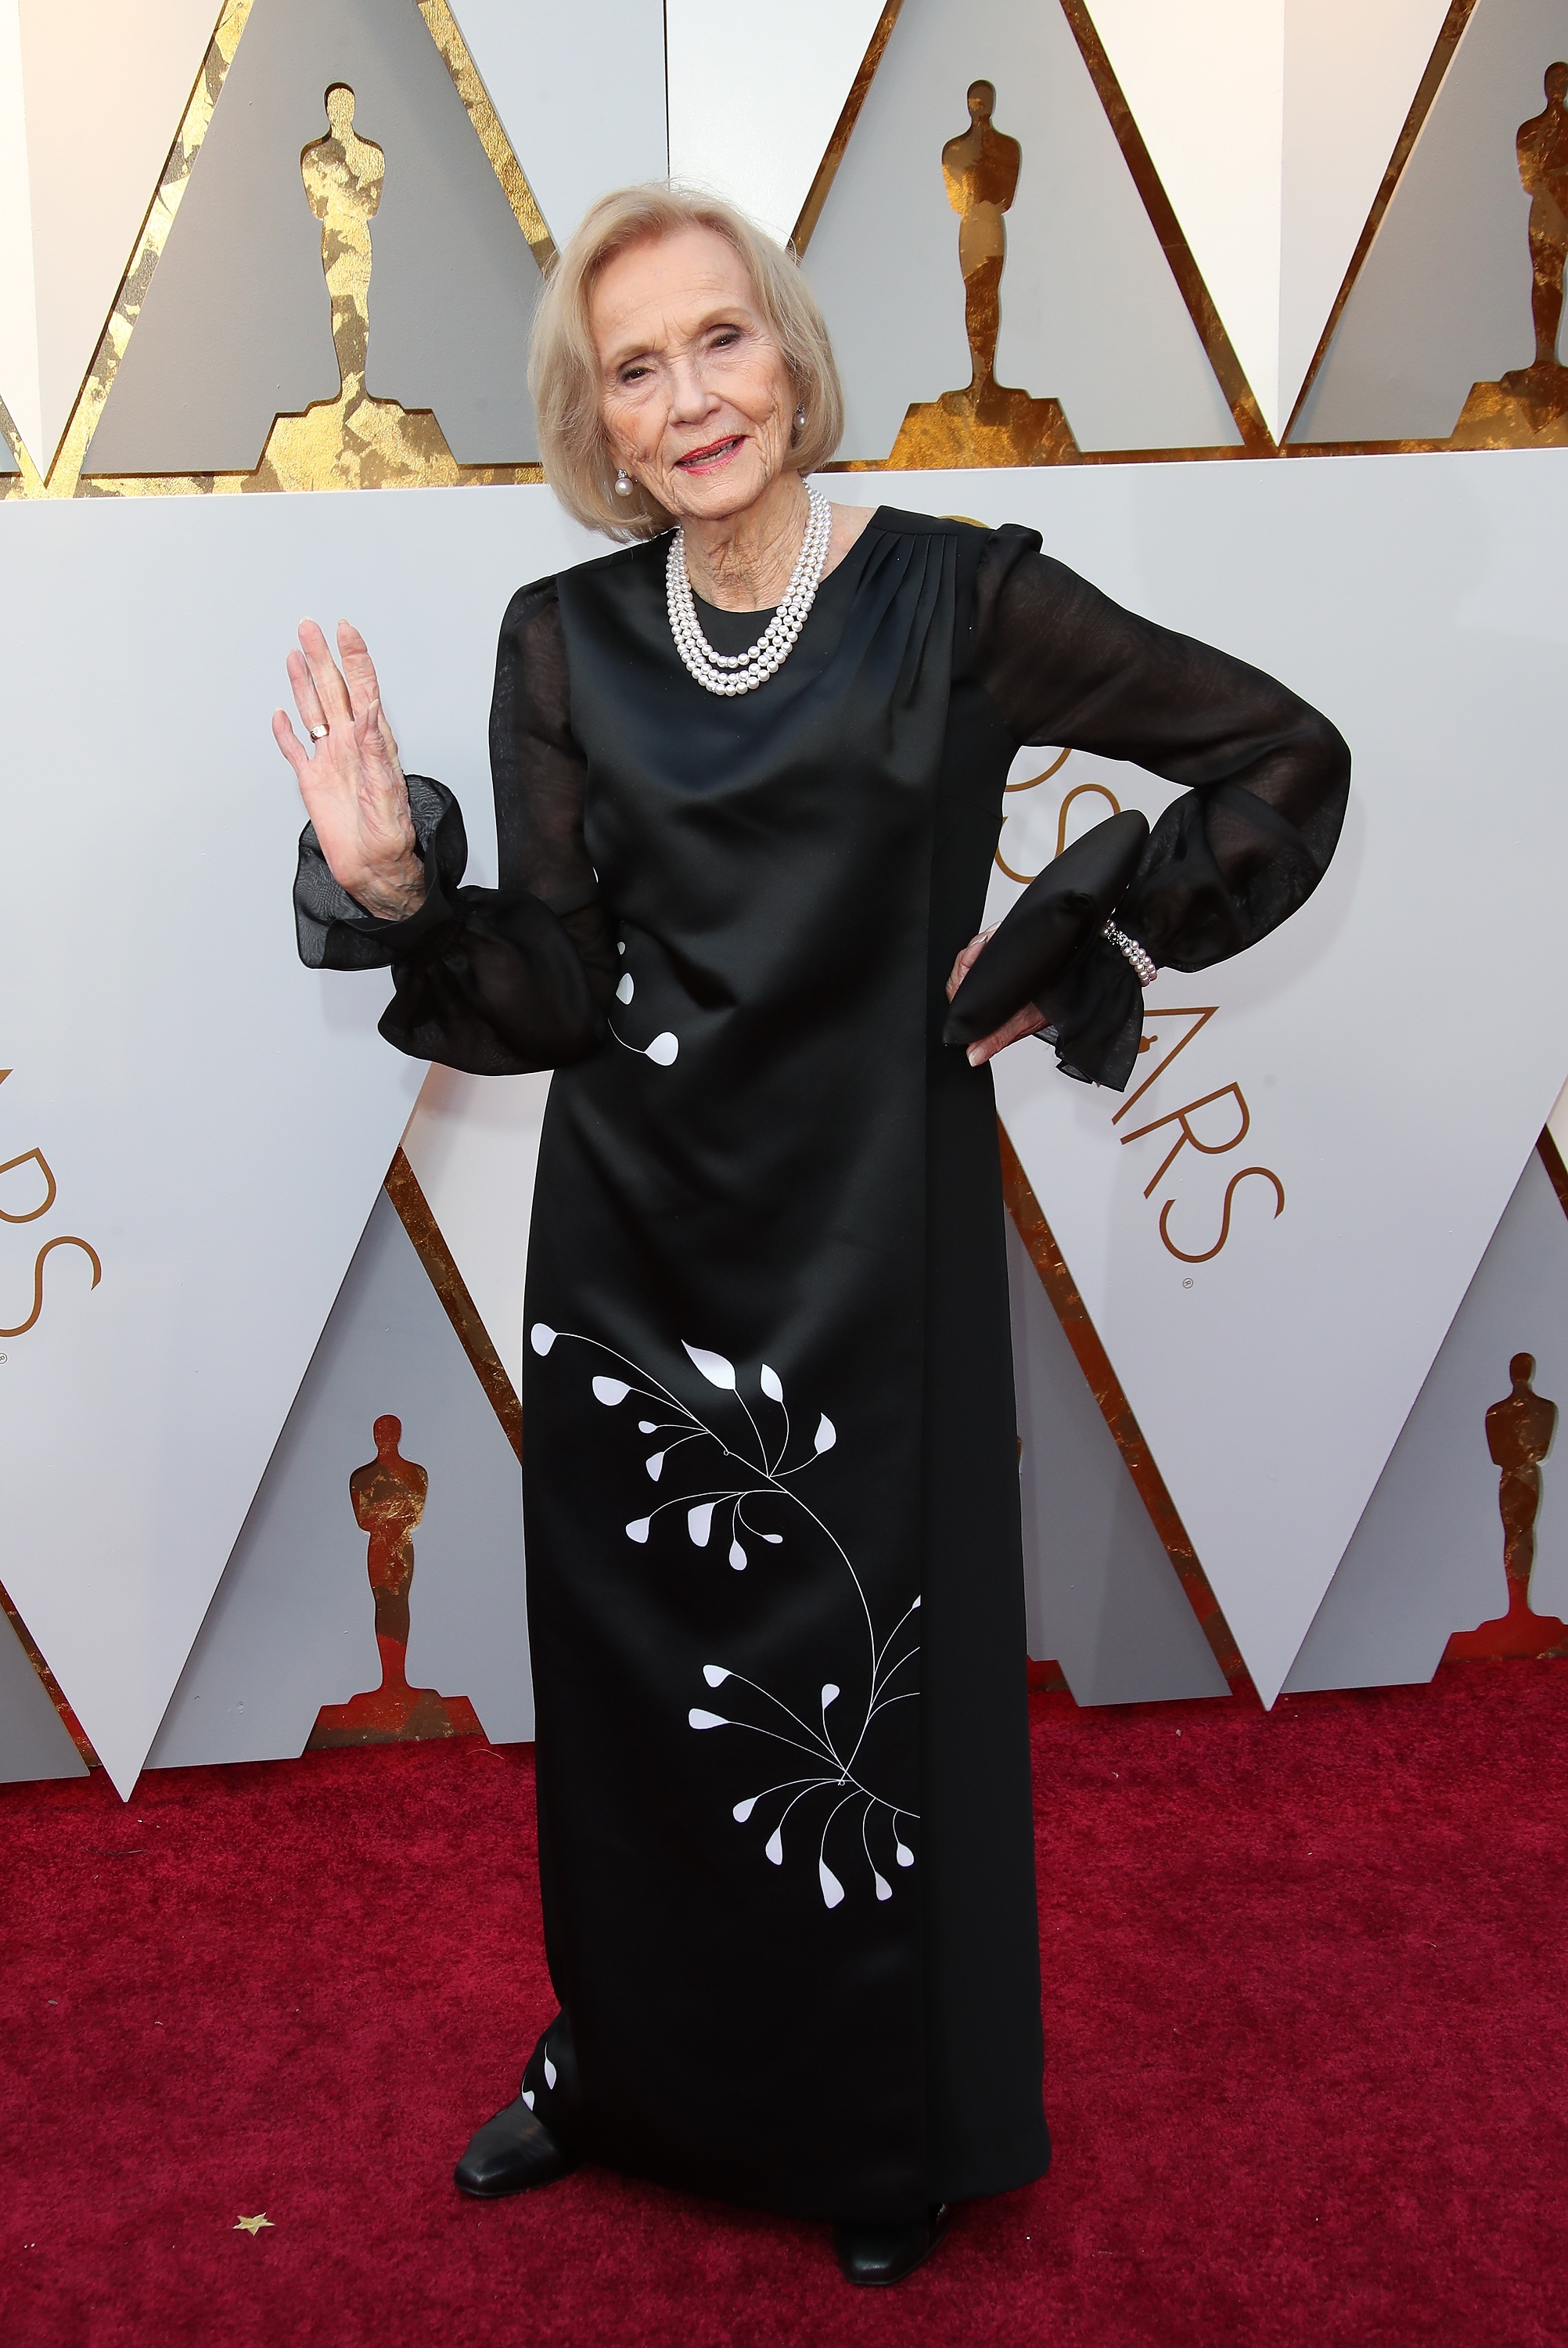 Eva Marie Saint at the 90th Annual Academy Awards in Hollywood, 2018 | Source: Getty Images